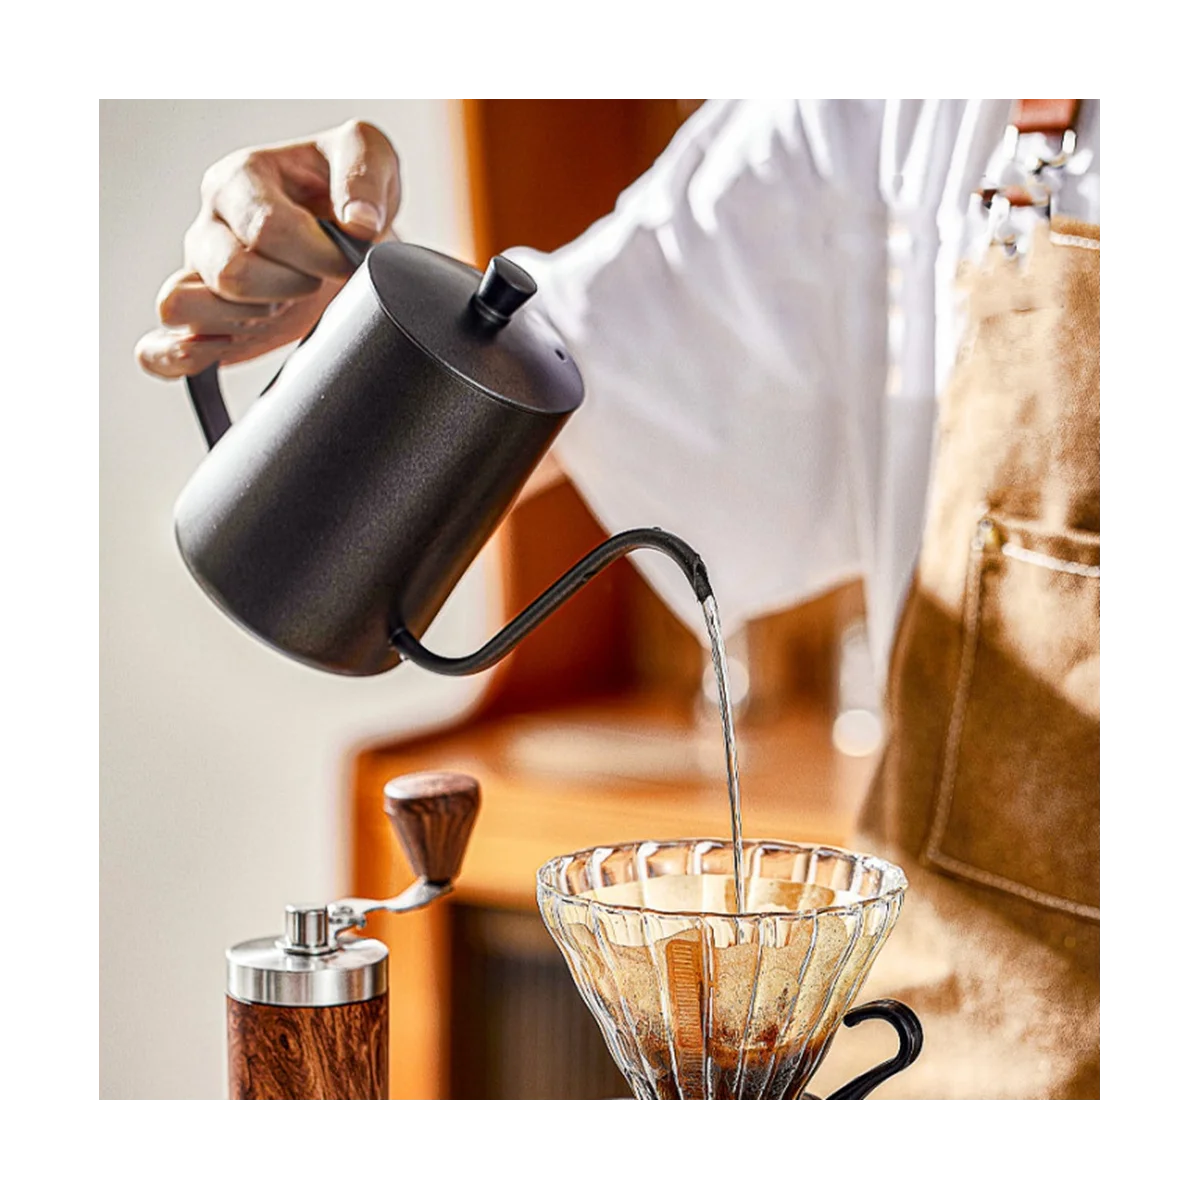 

Hand Brewed Coffee Set Outdoor Barista Tools Dripper Filter Coffee Kettle Manual Grinder Portable Gooseneck Kettle